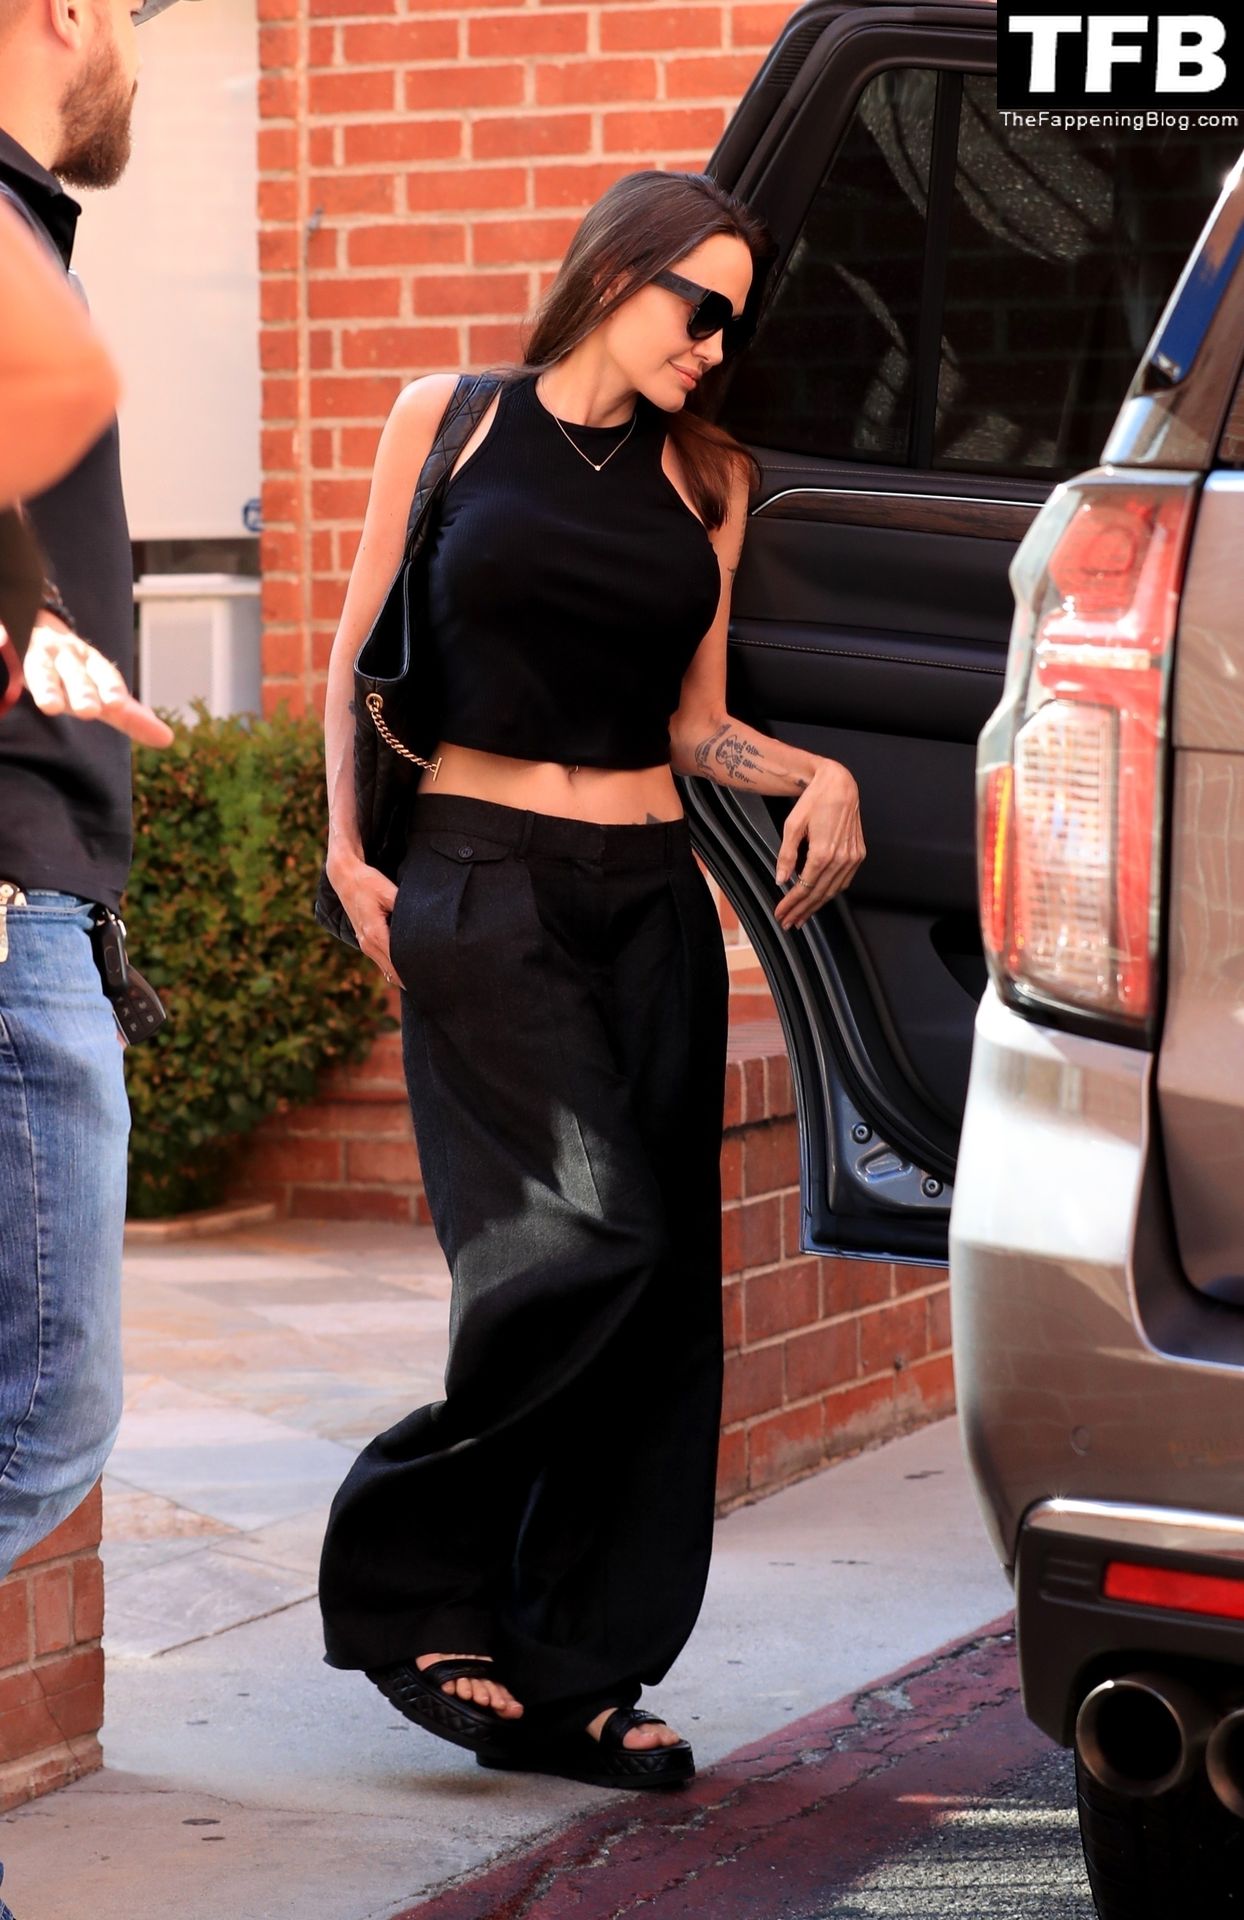 Angelina Jolie Braless The Fappening Blog 16 - Angelina Jolie Shows Off Her Tight Tummy Leaving an Office Building (33 Photos)